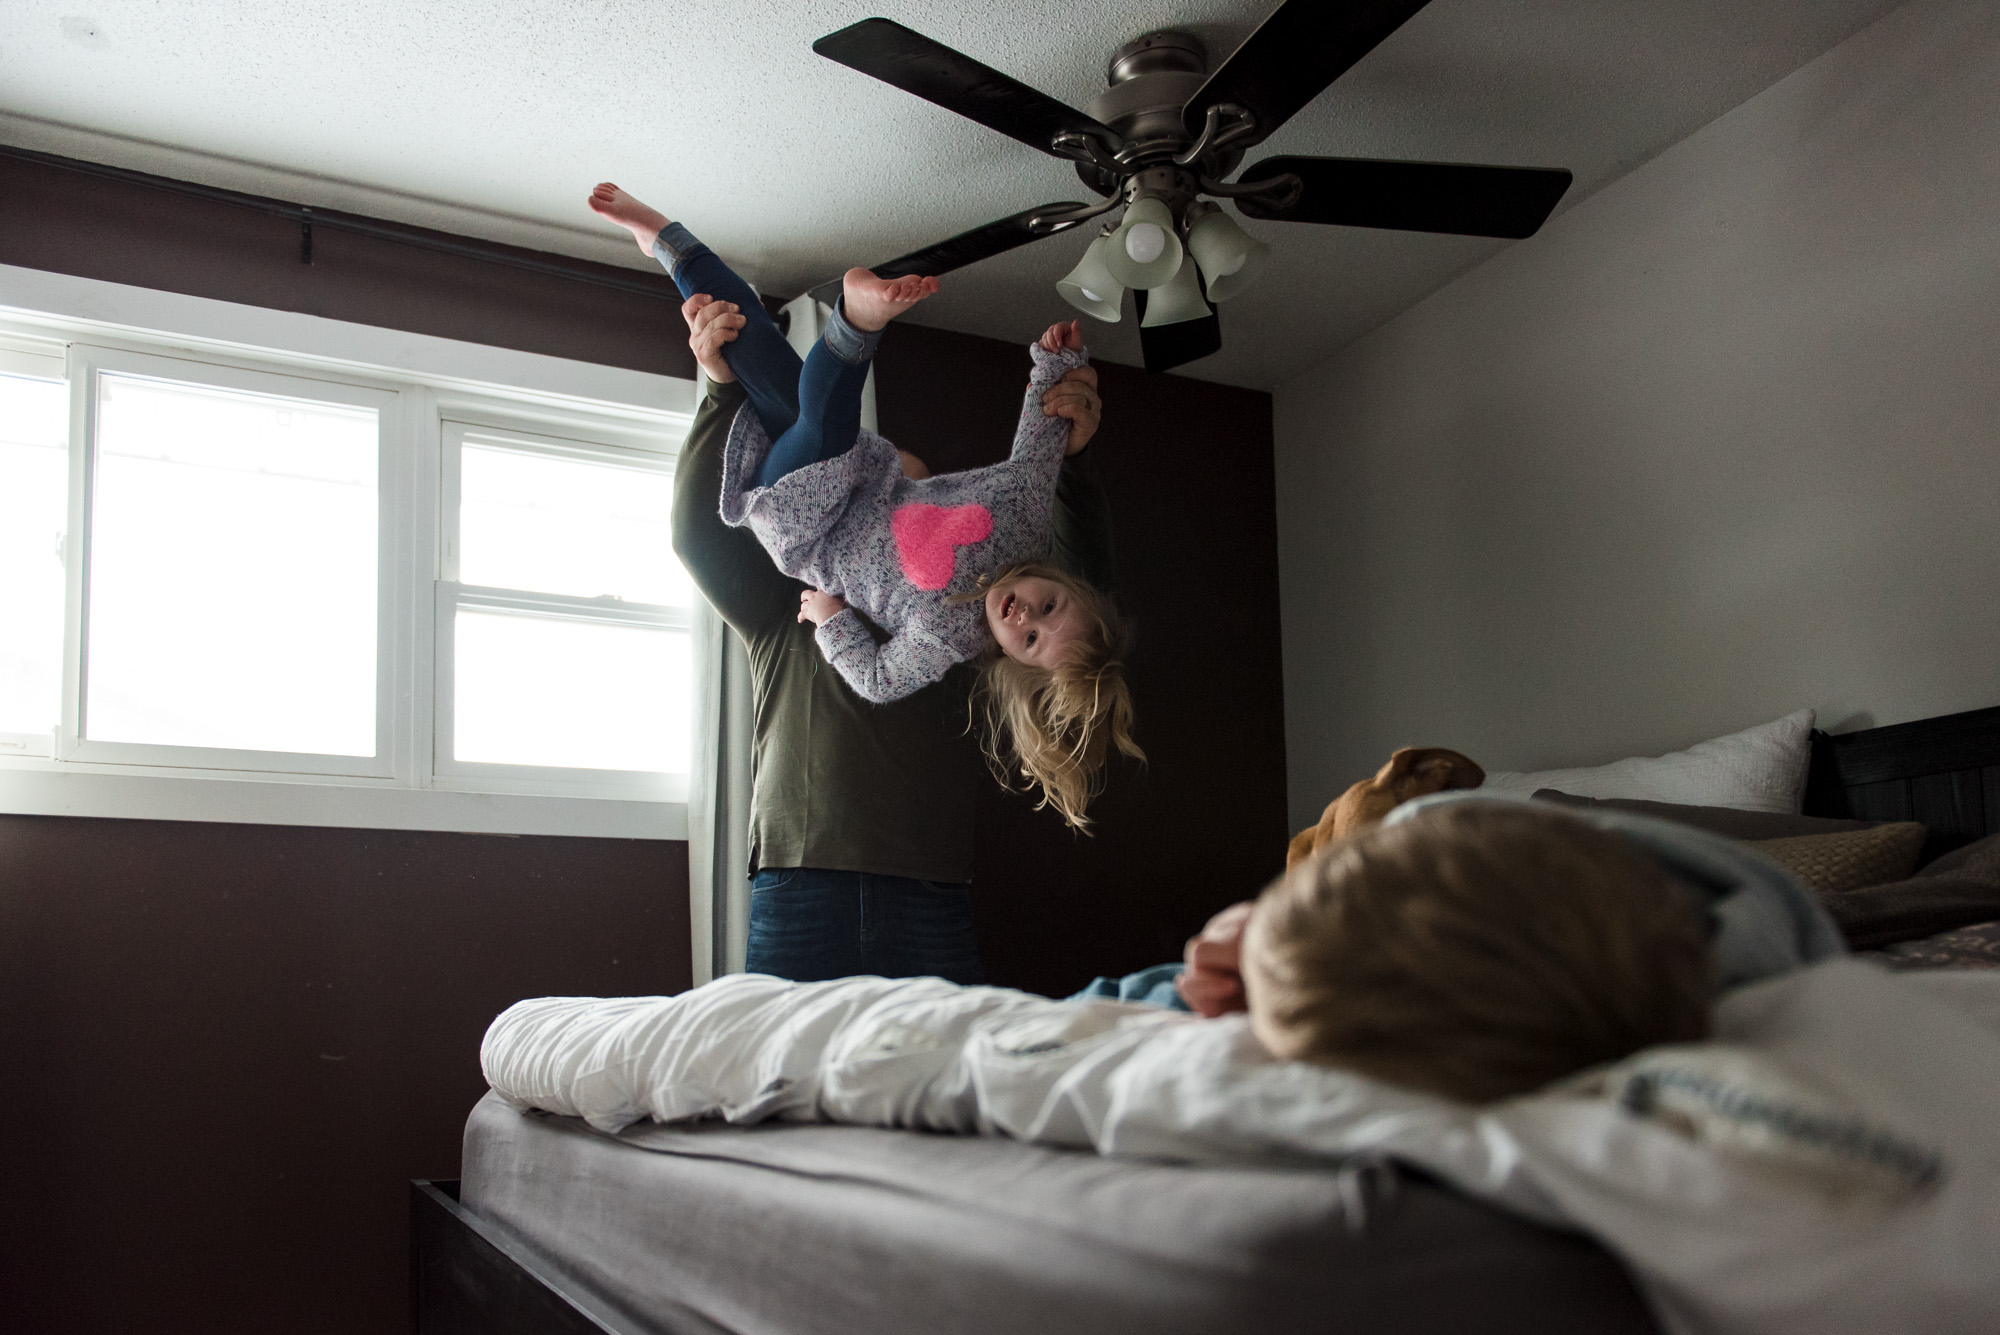 A dad tosses his daughter in the air during a sherwood park family photo session